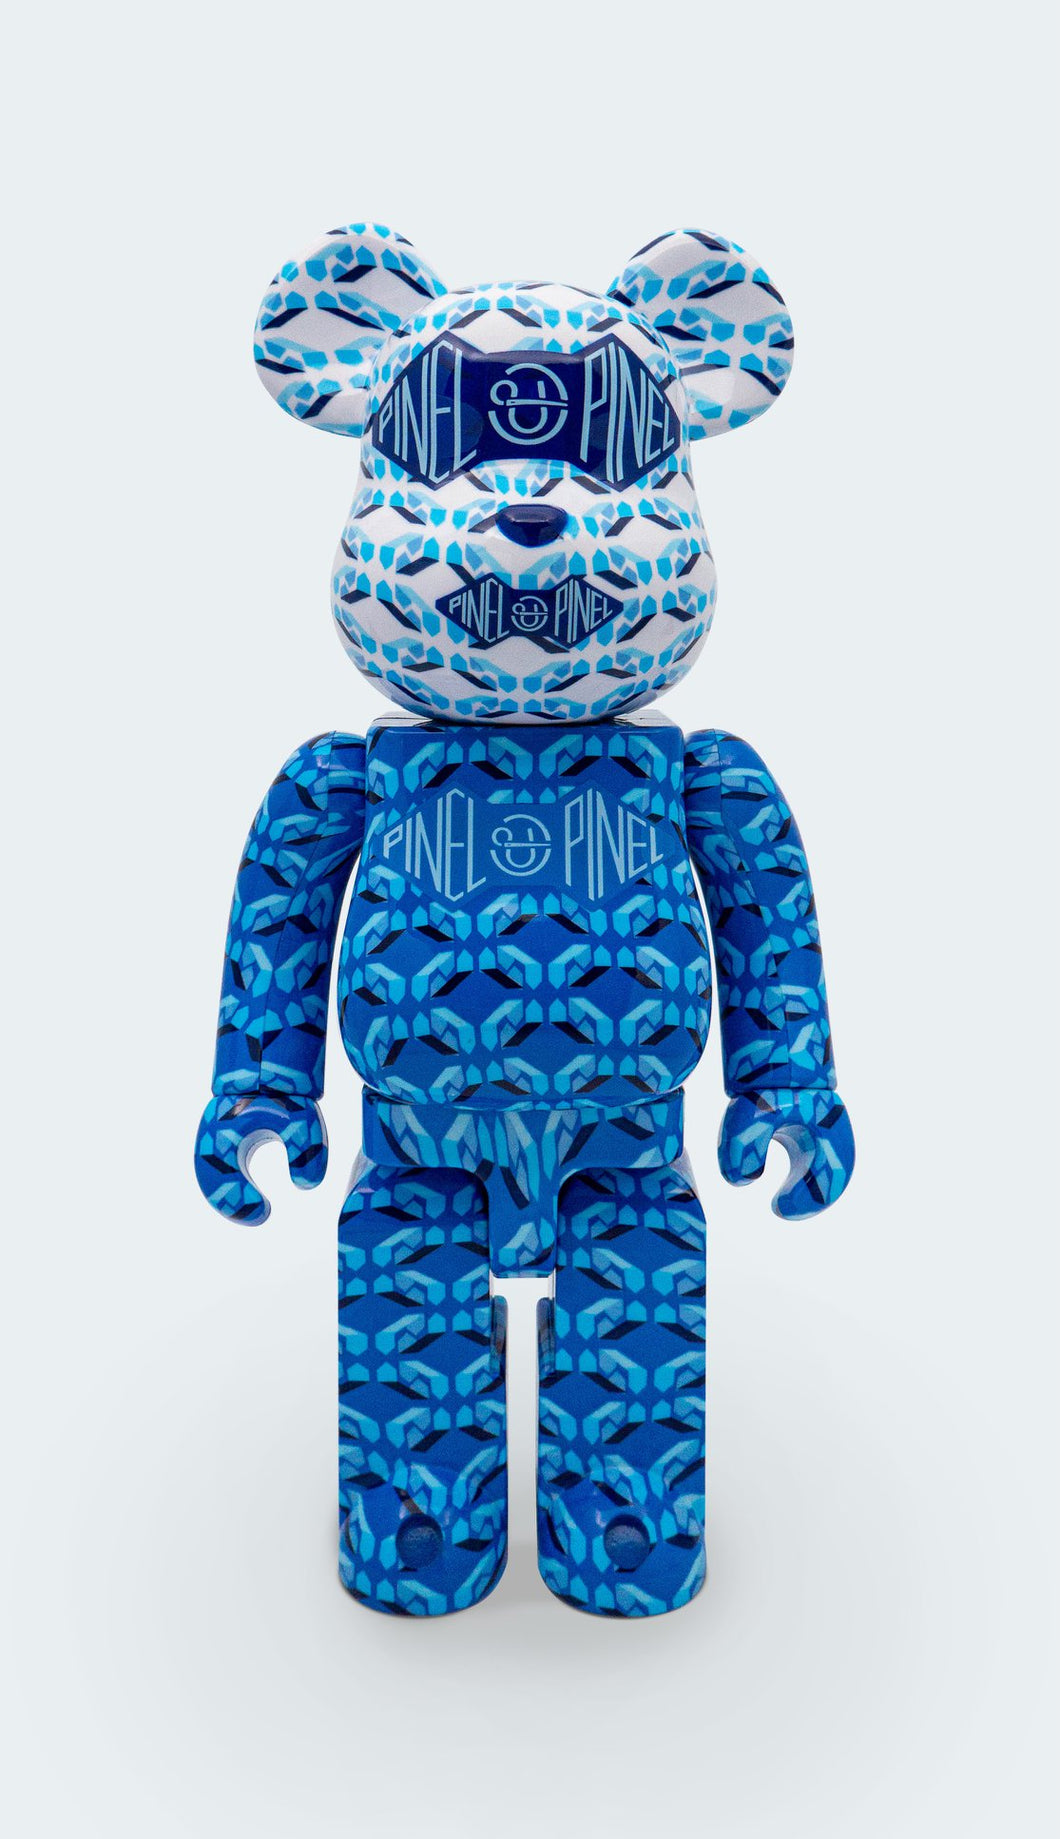 Pinel and Pinel 400% Bearbrick